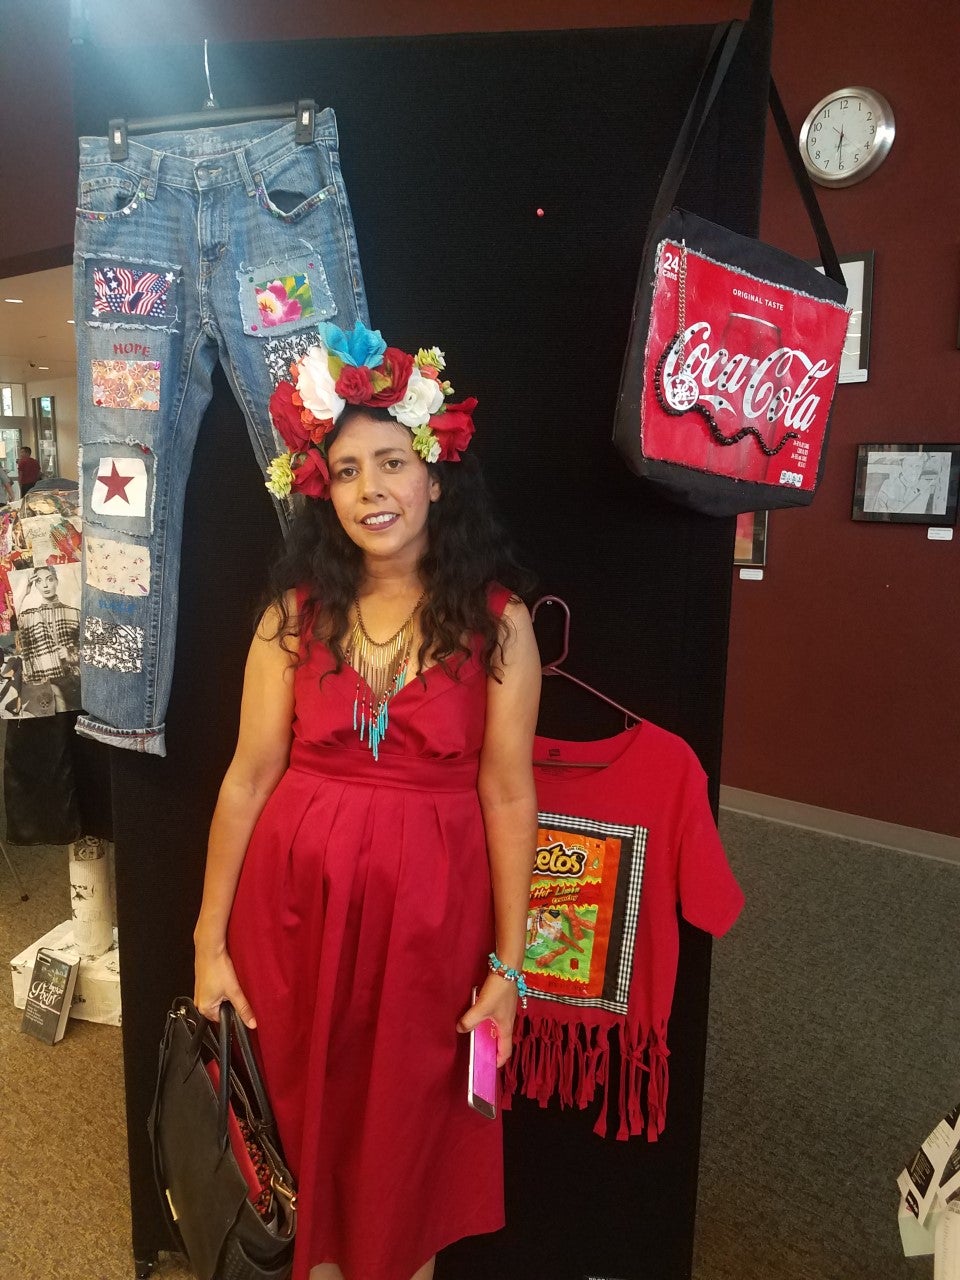 A woman in a red dress and flower crown standing beside mixed media art/clothing